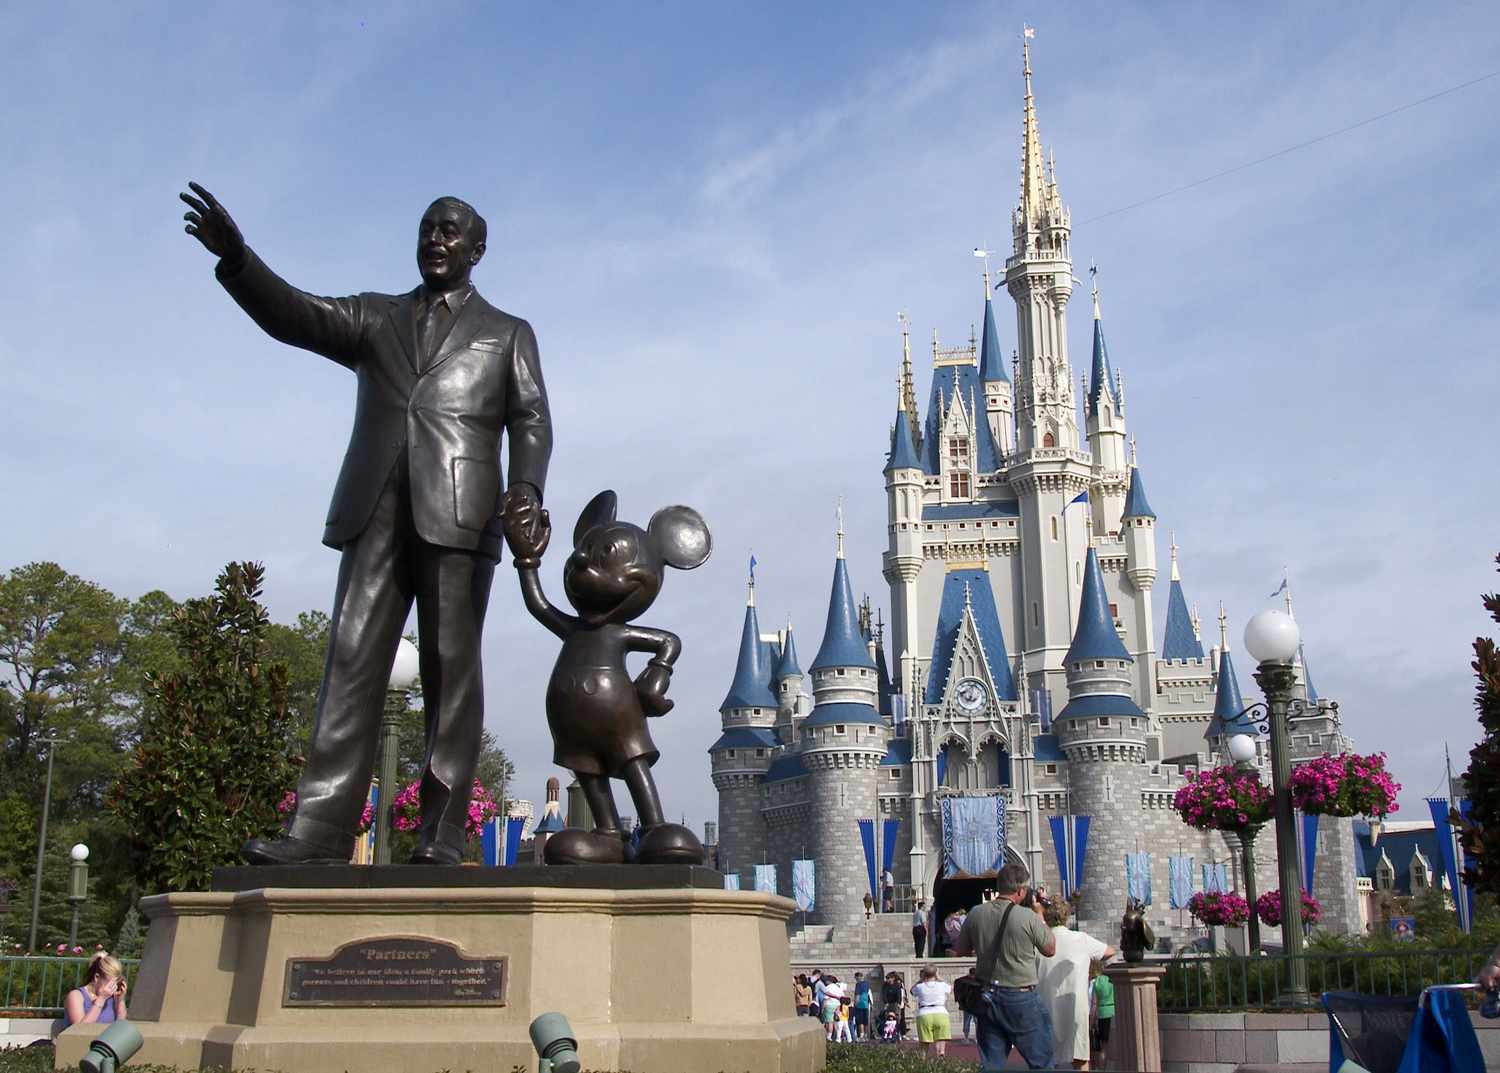 A statue of Walt Disney and Mickey Mouse stands in front of